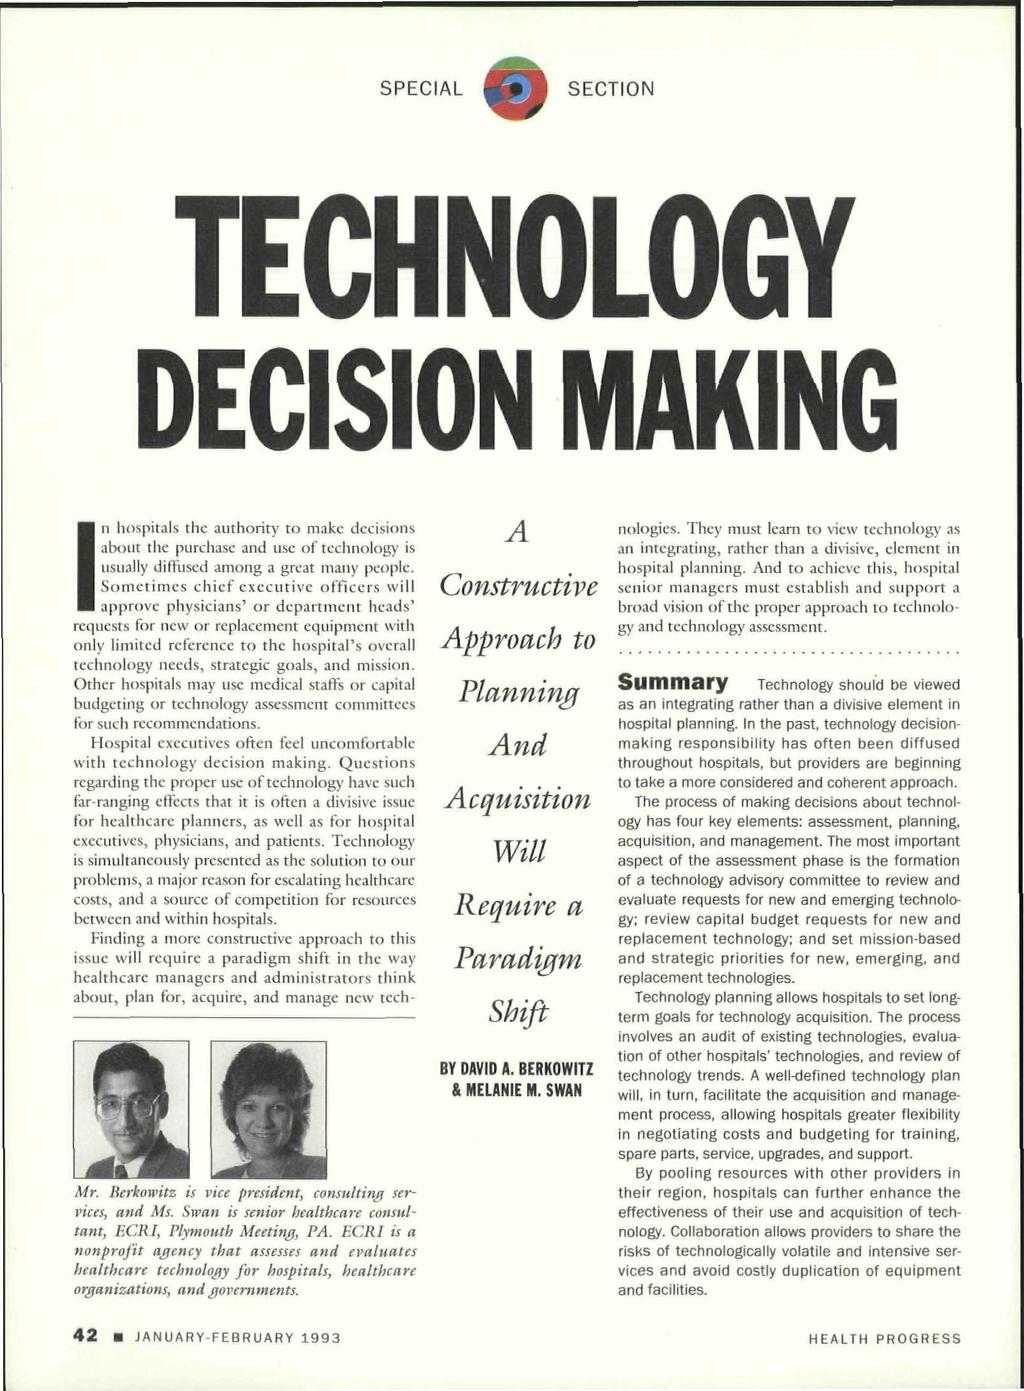 TECHNOLOGY DECISION MAKING In hospitals the authority to make decisions about the purchase and use of technology is usually diffused among a great many people.